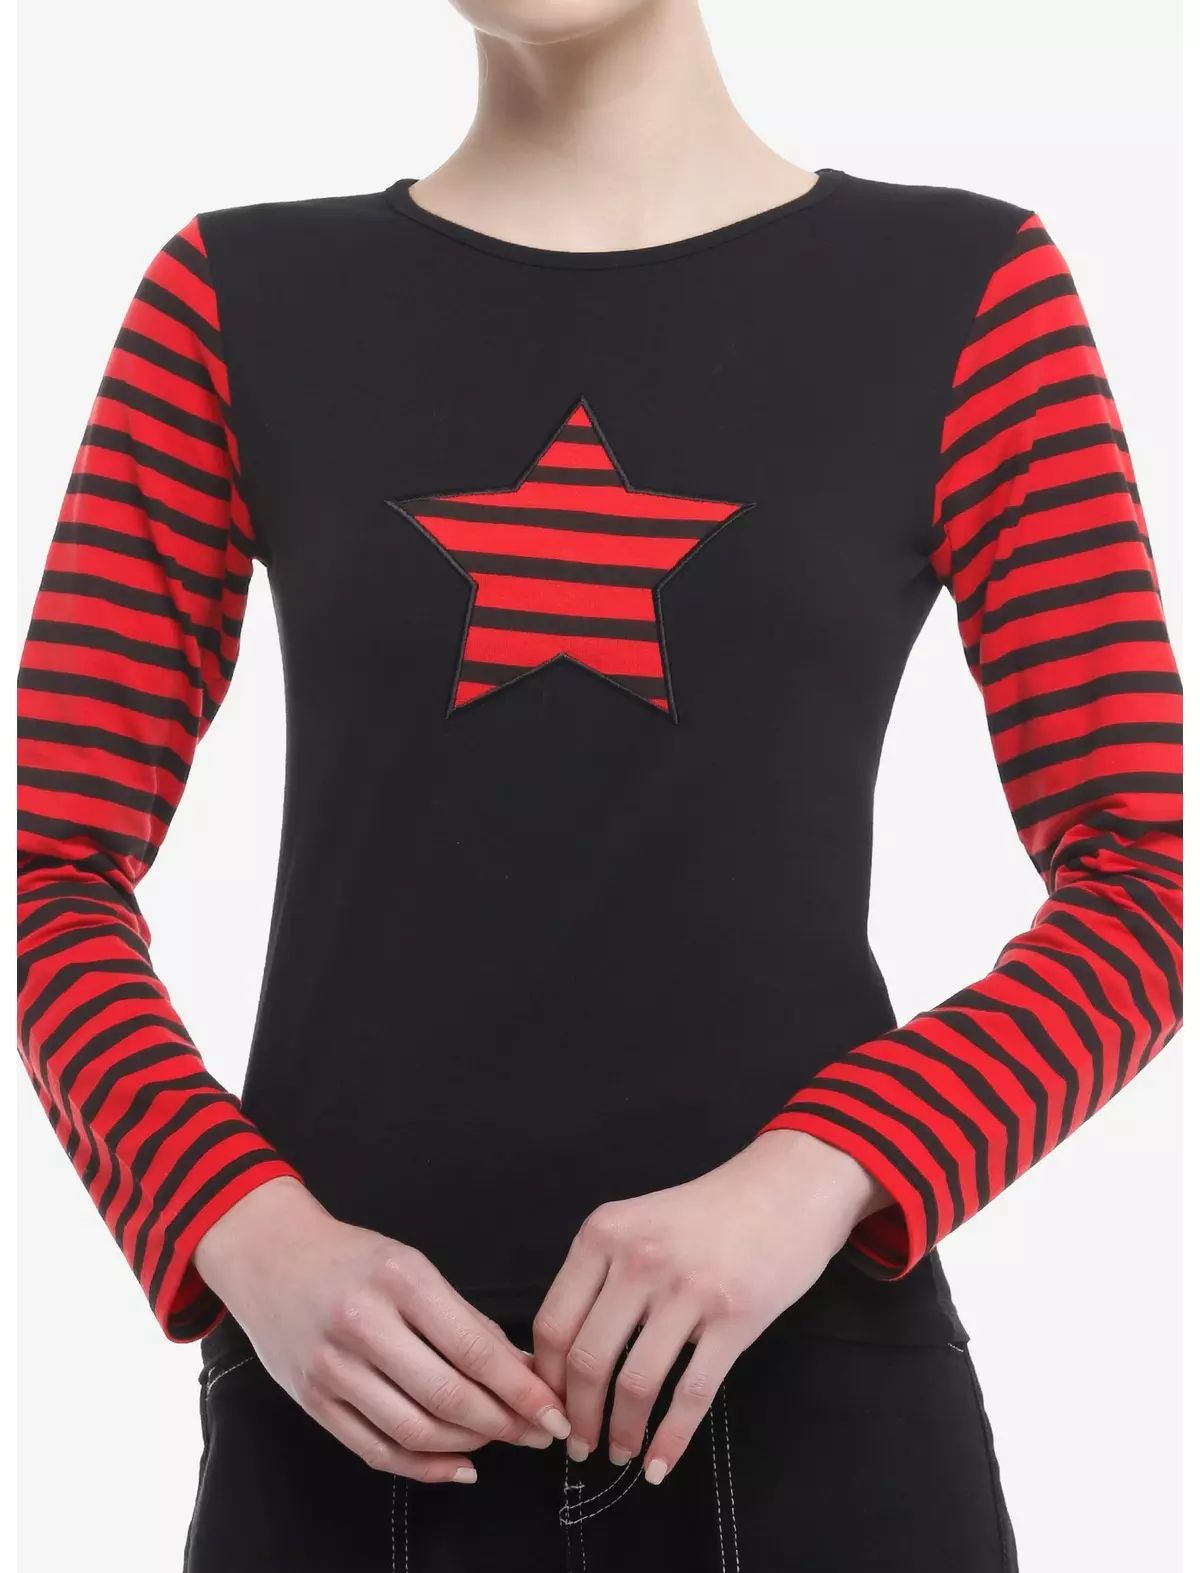 Social Collision® Black & Red Stripe Star Girls Long-Sleeve Crop Top | Hot Topic